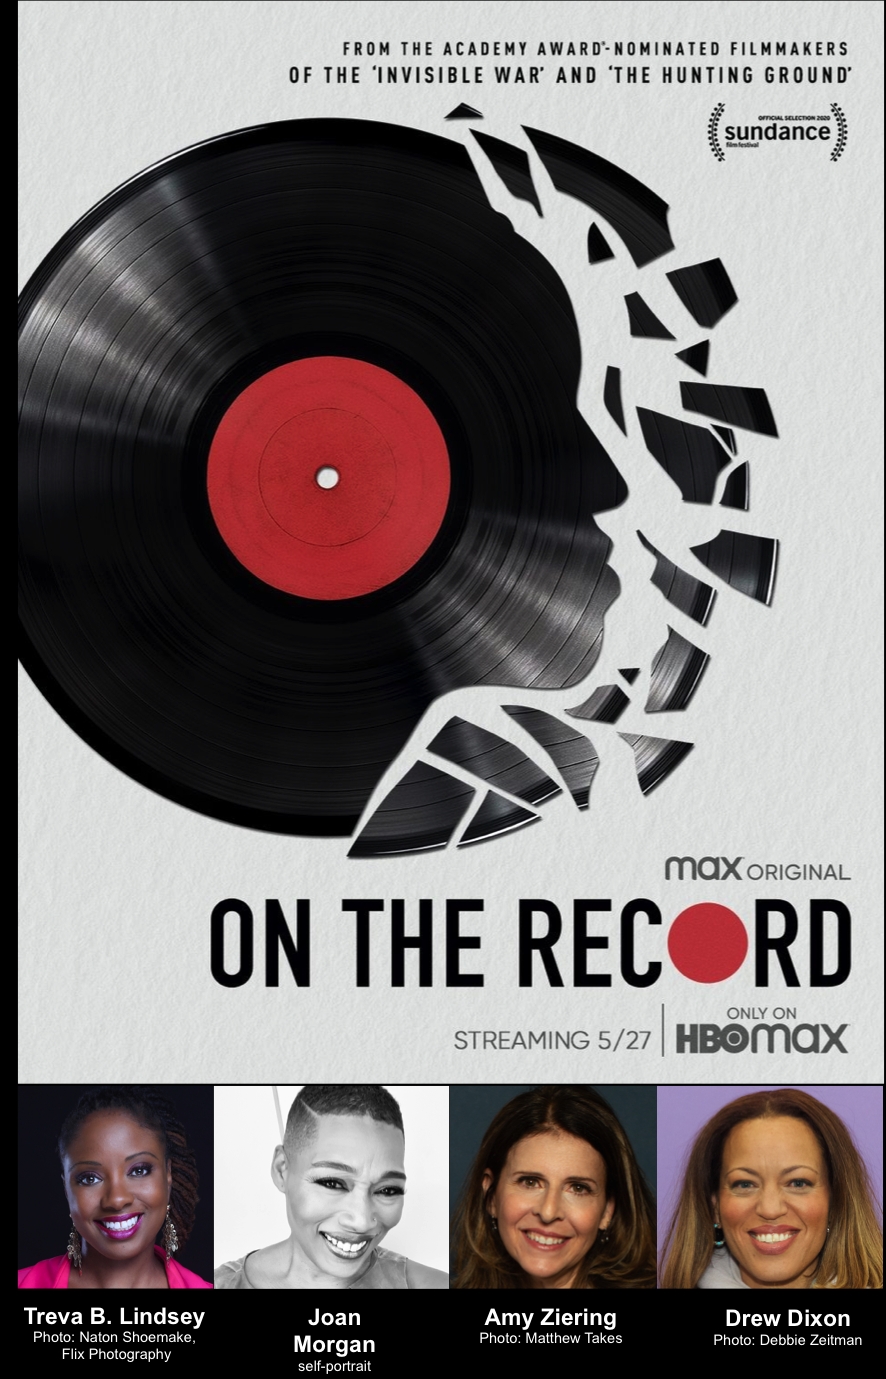 On the Record: A Conversation with Amy Ziering, Drew Dixon, and Joan Morgan, moderated by Treva B. Lindsey Webinar